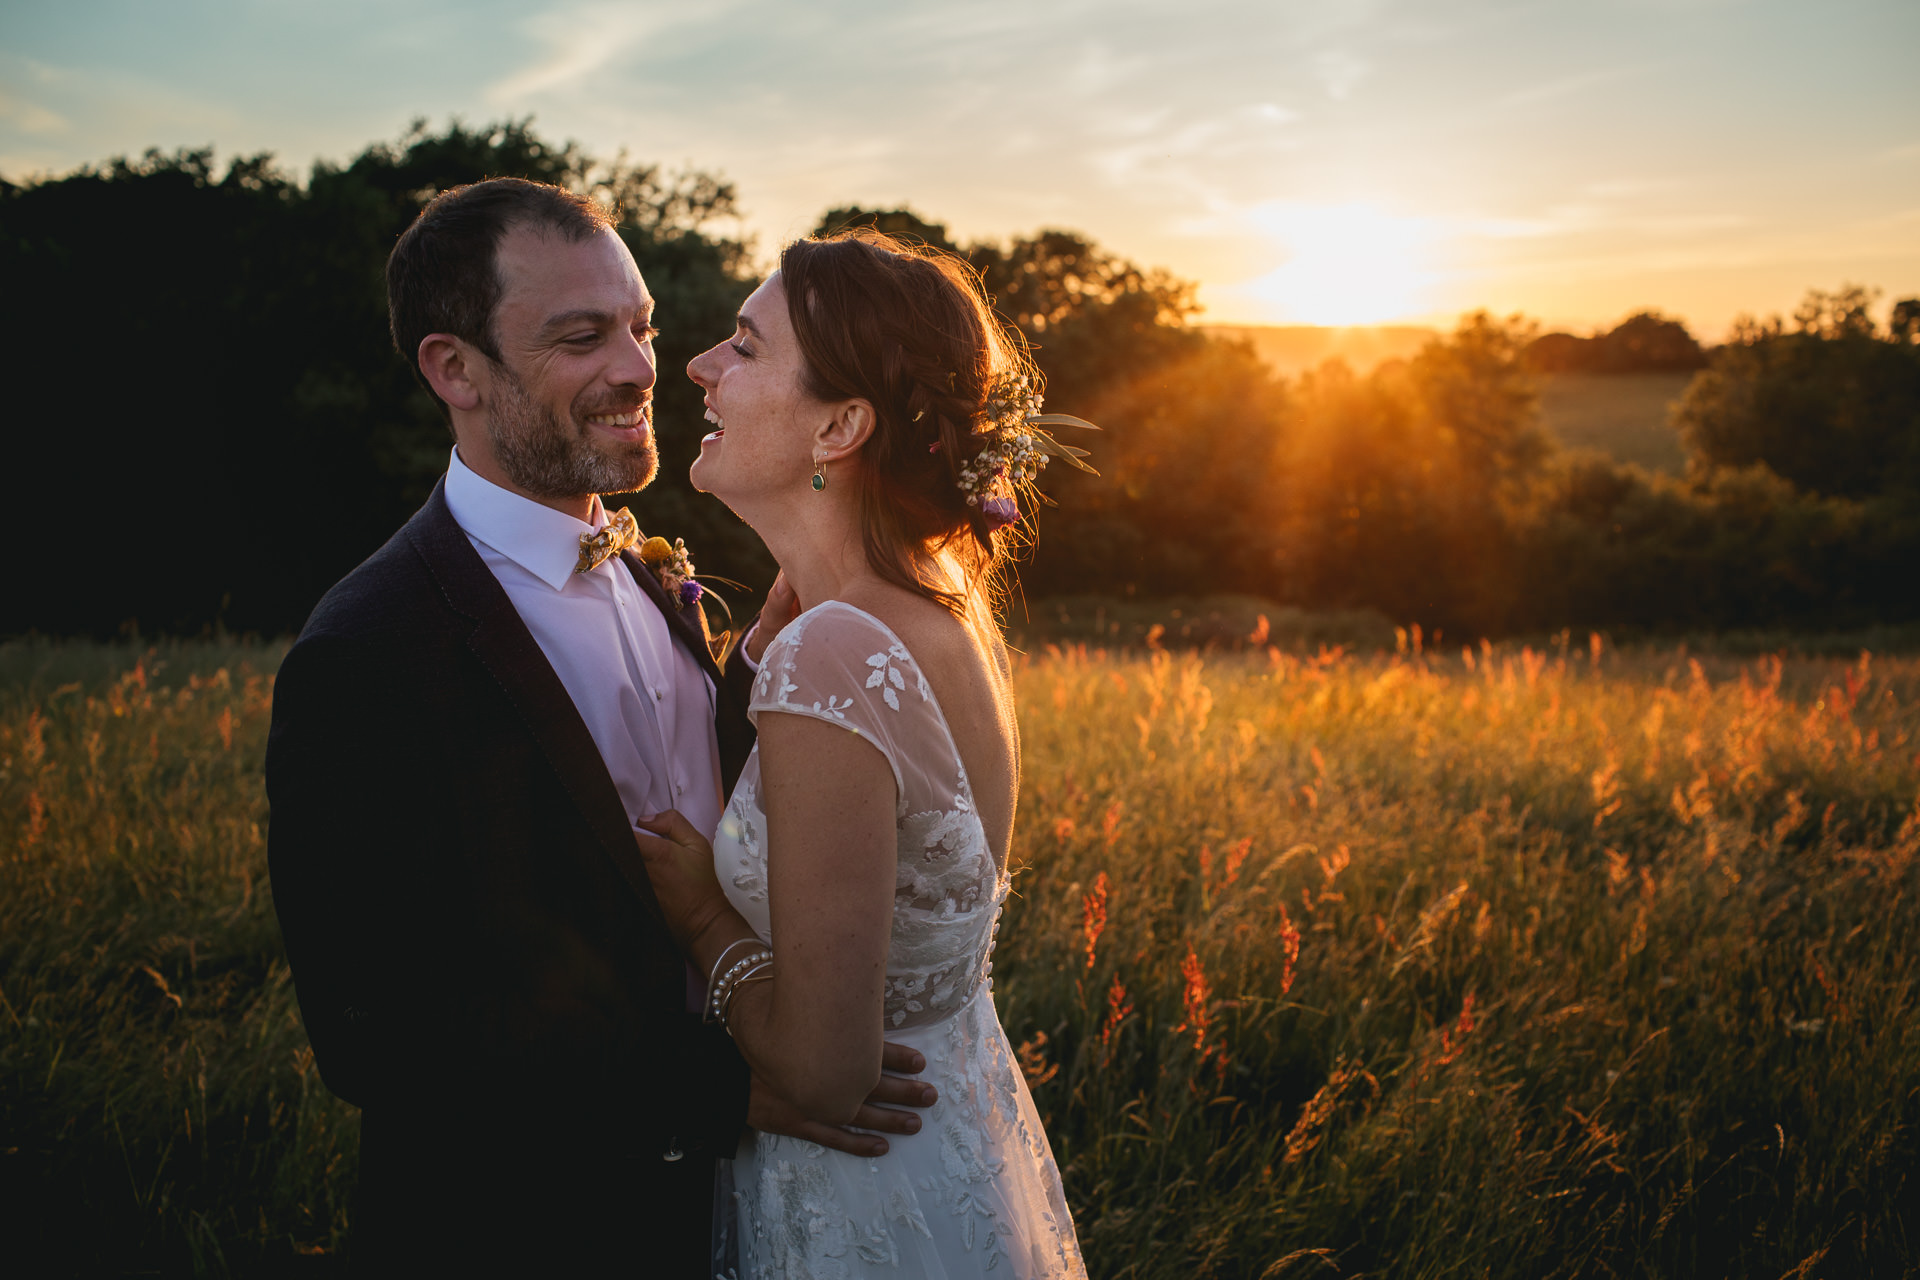 Bride and groom cuddling in sunset